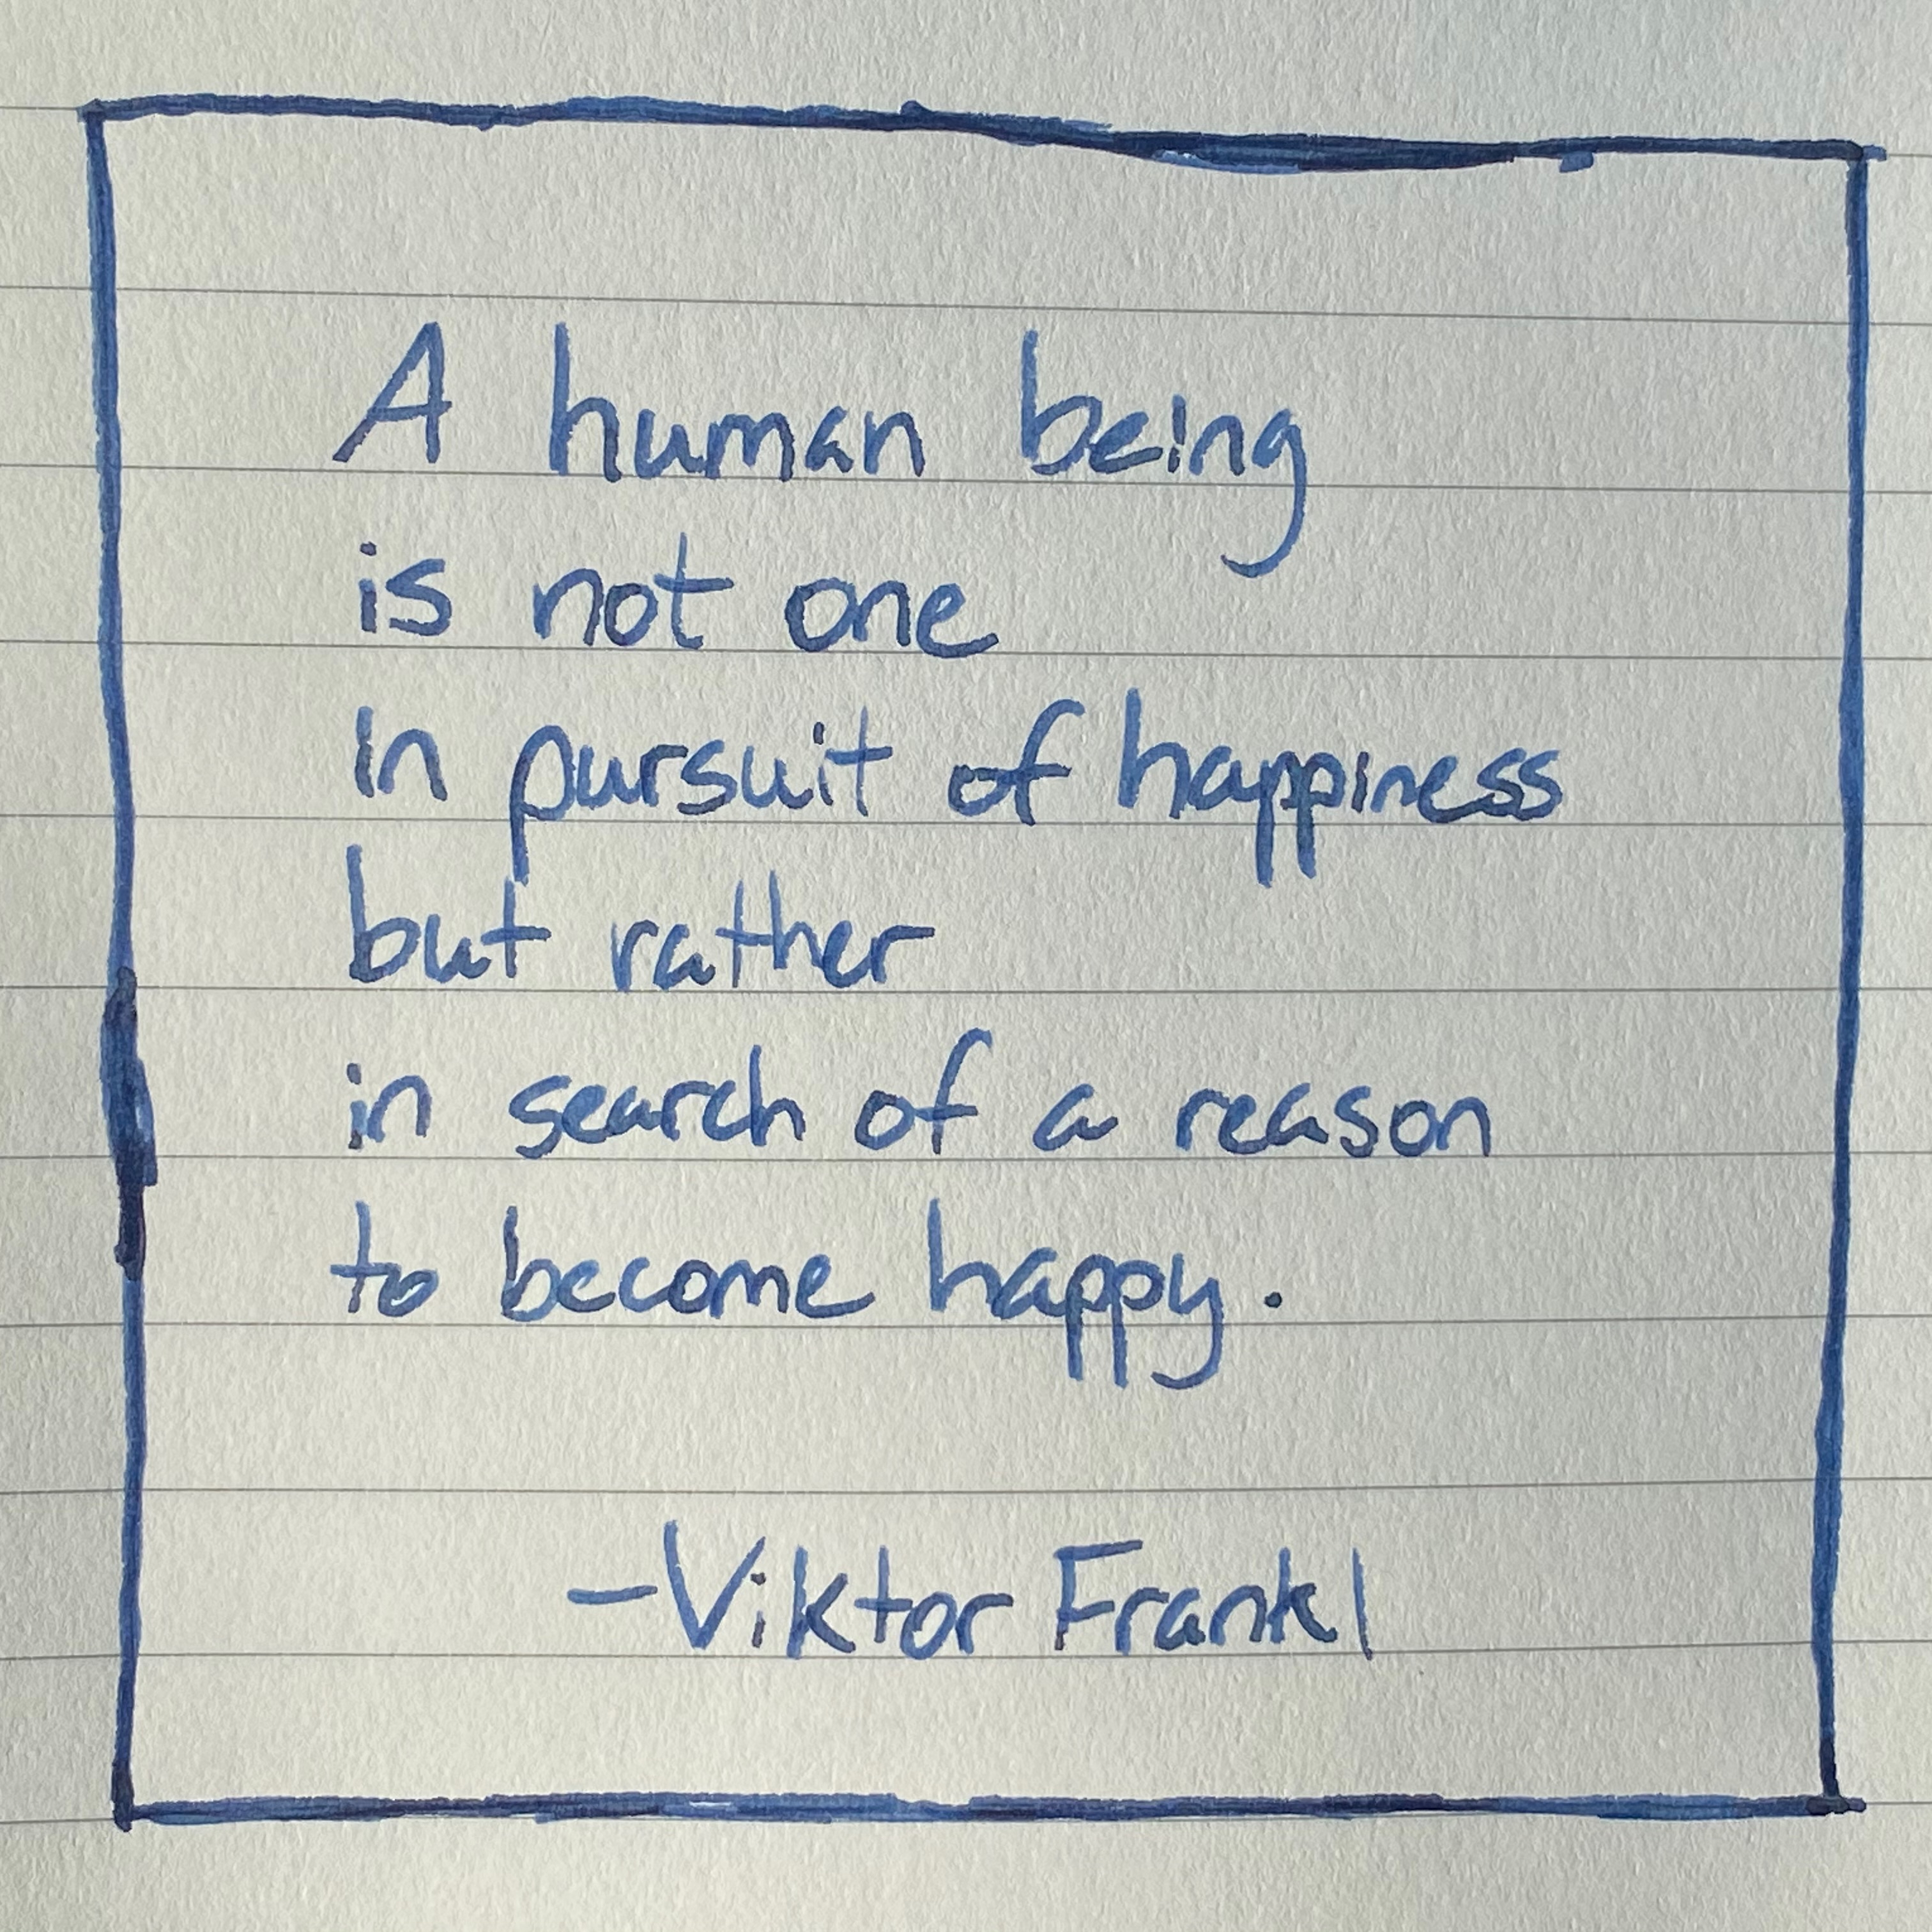 Handwritten quote in blue ink on lined paper with box around words by Viktor Frankl: A human being is not one in pursuit of happiness but rather in search of a reason to become happy.